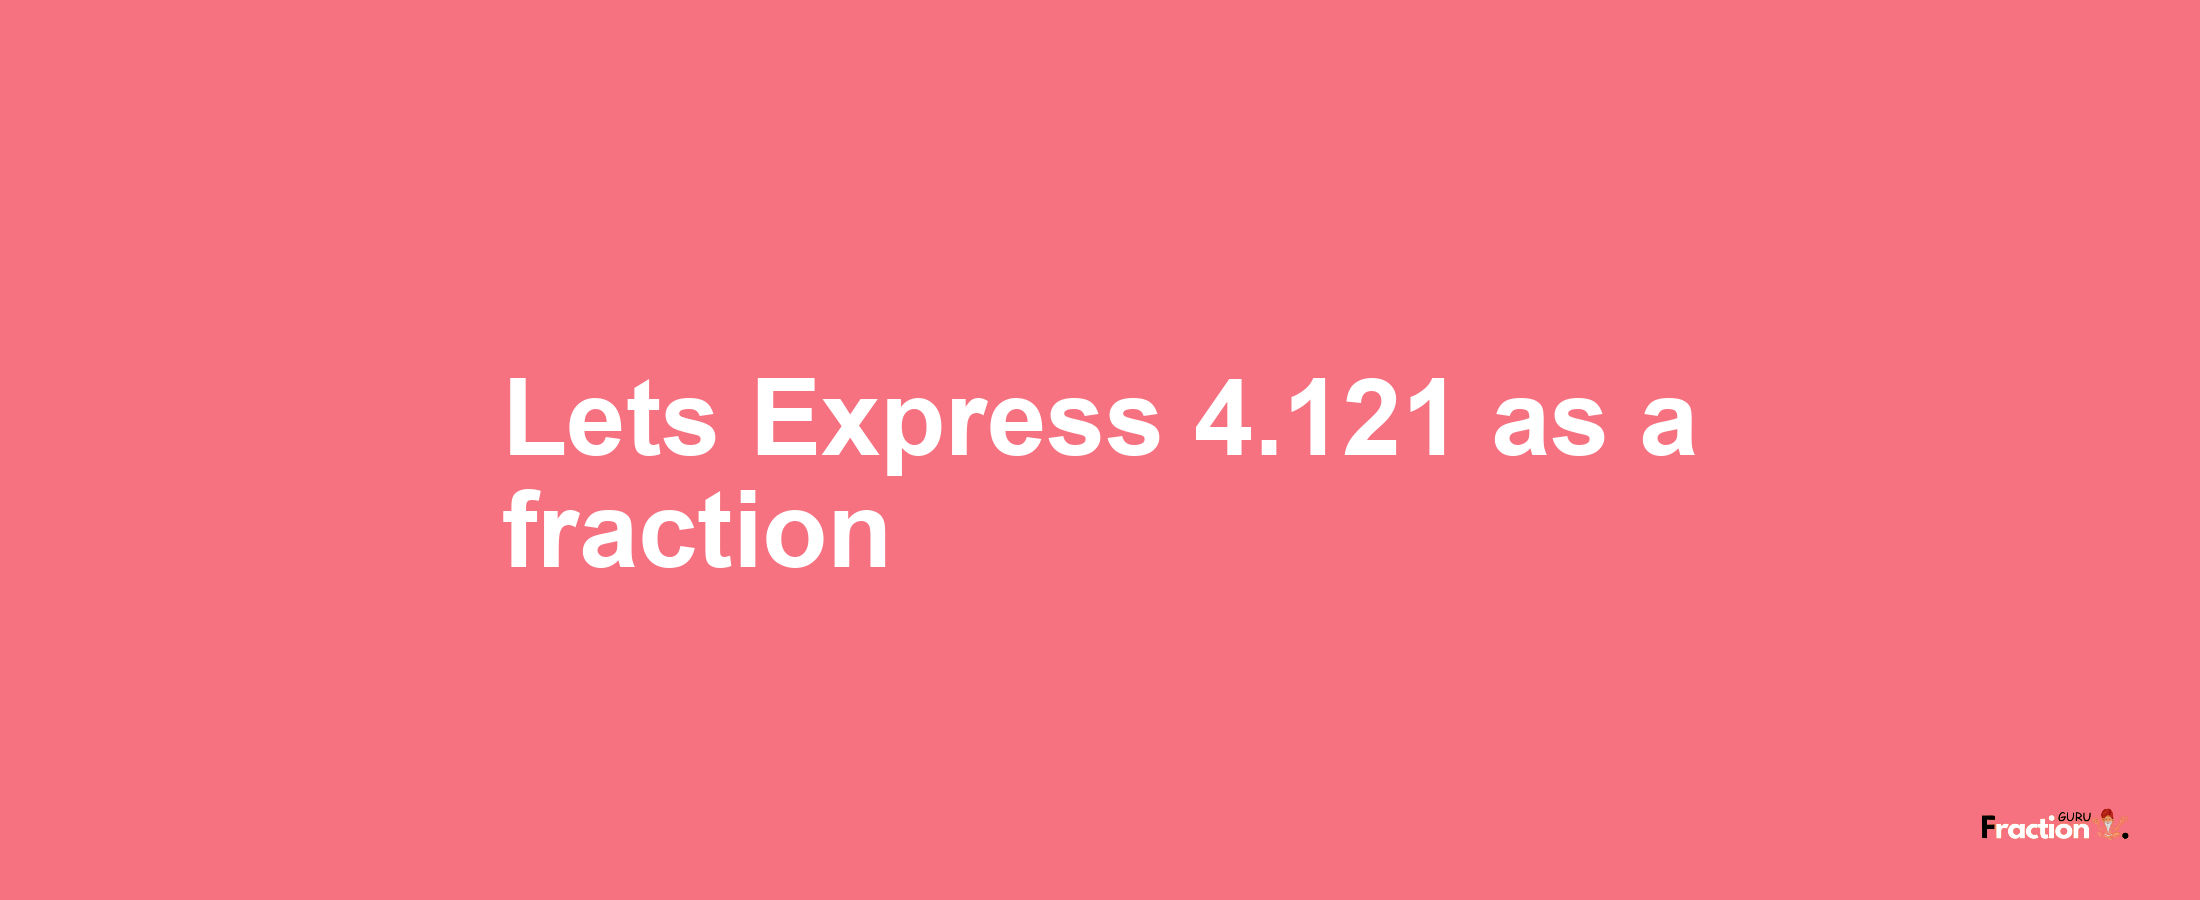 Lets Express 4.121 as afraction